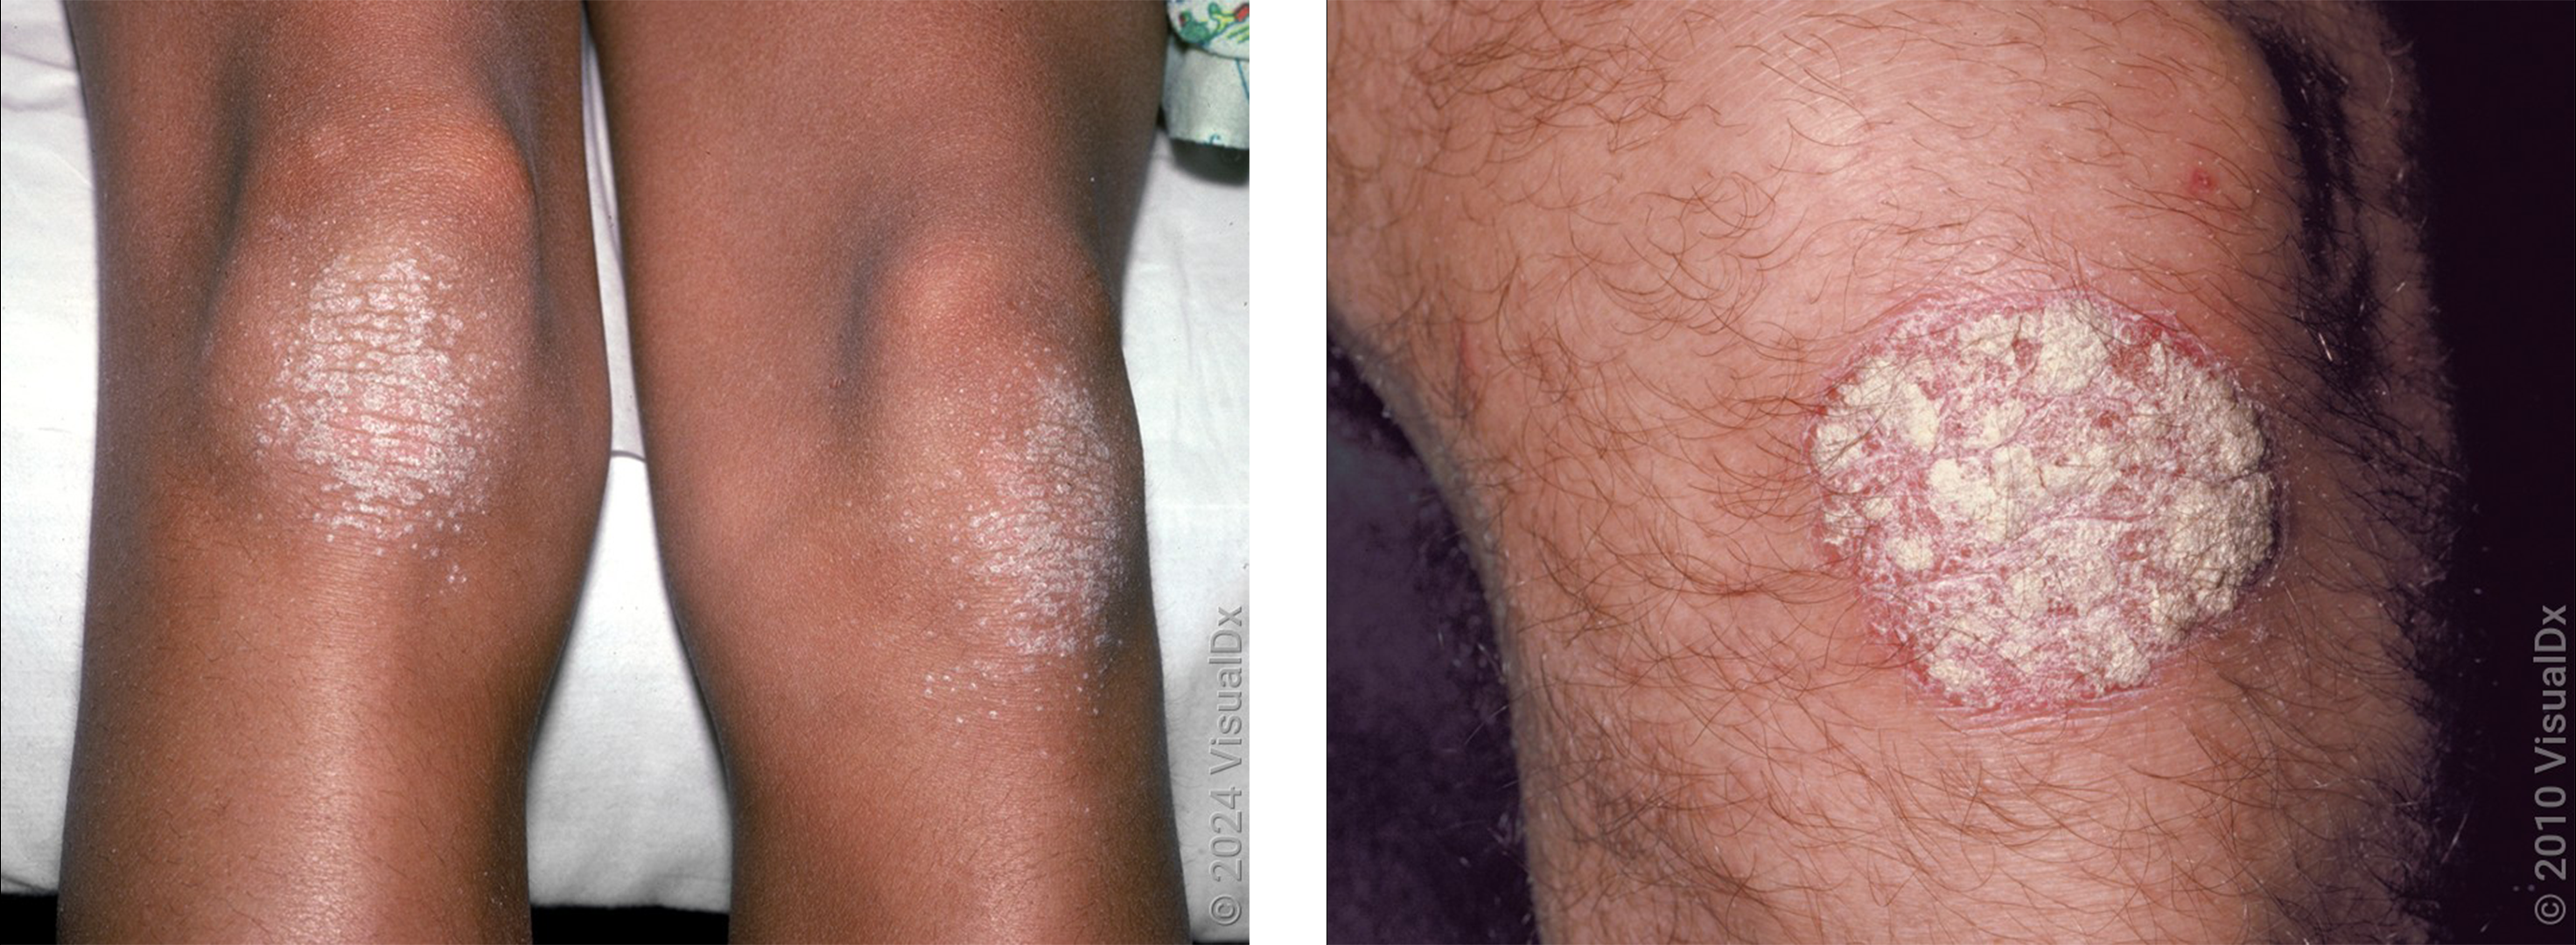 Left: Many round, white-gray scaly patches on the skin in an autoimmune rash. Right: A white, round patch on the skin in an autoimmune rash.